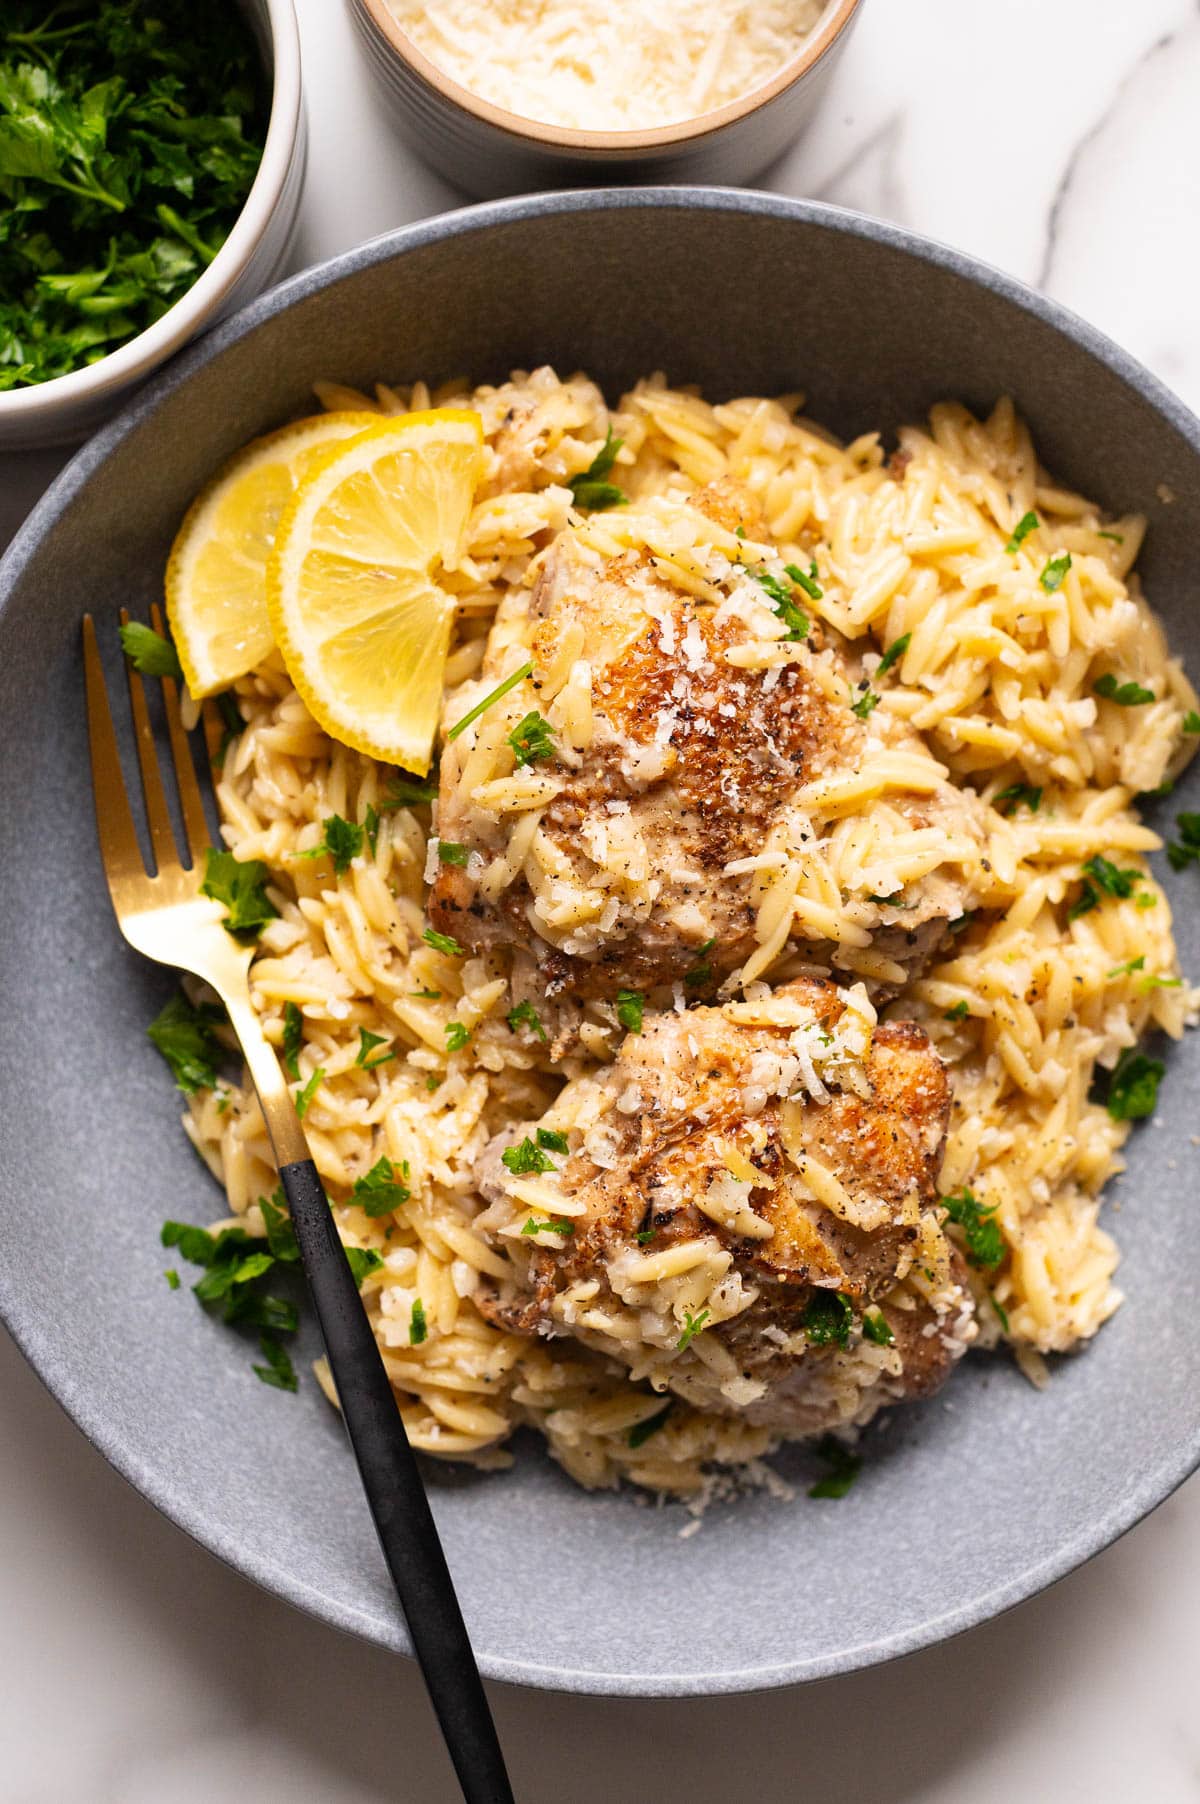 Lemon chicken orzo served on a plate and garnished with lemon slices and parsley.